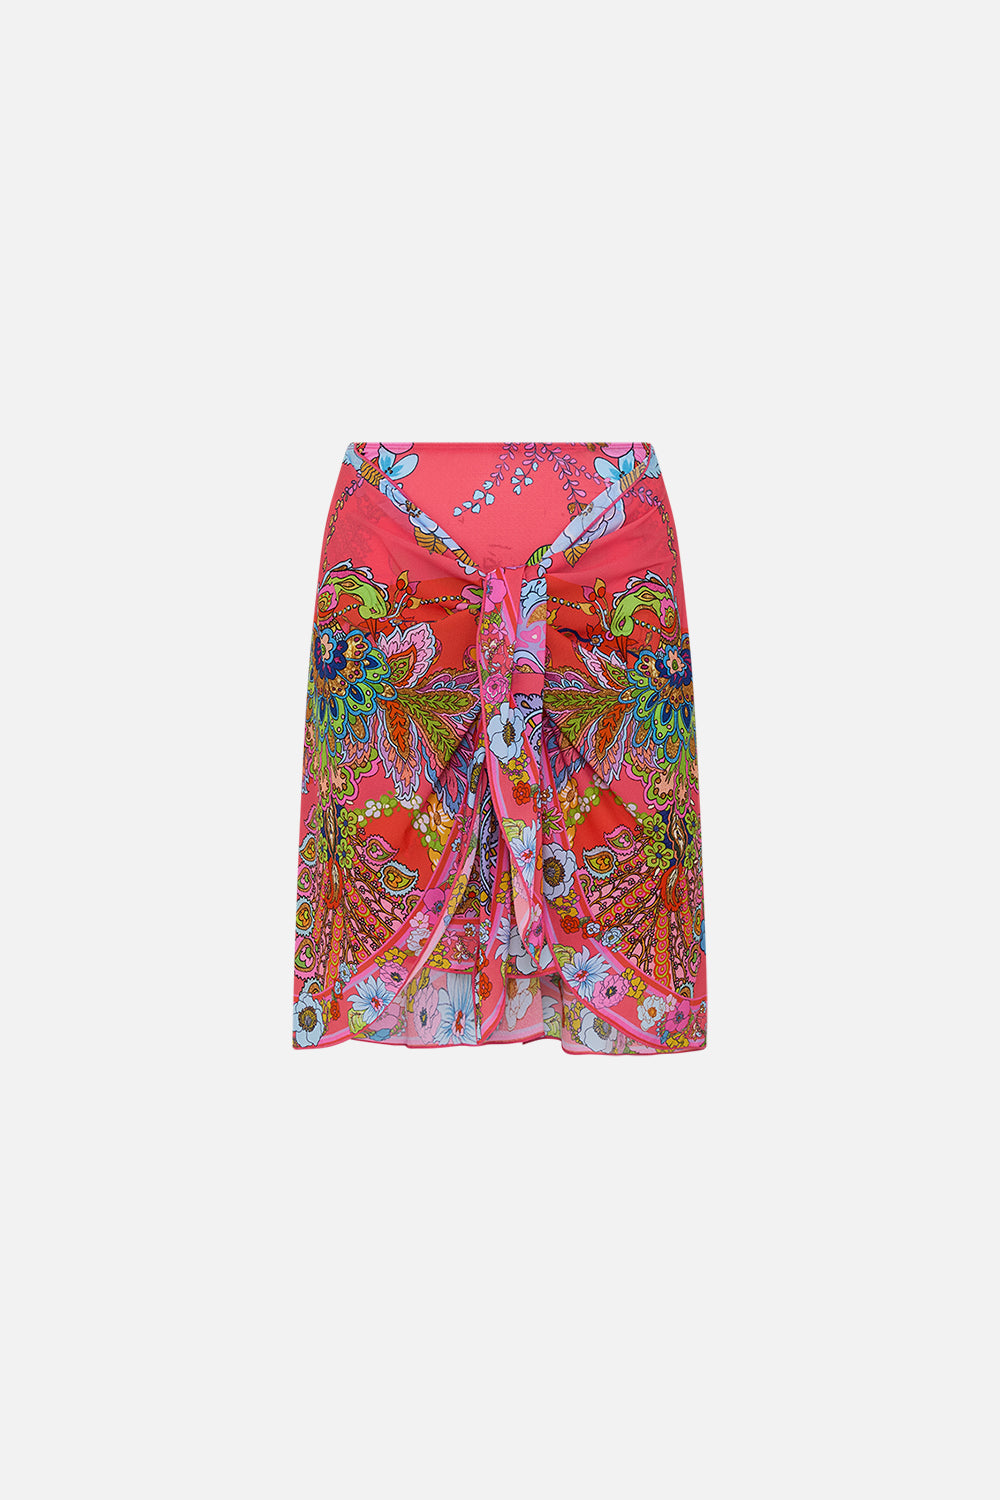 CAMILLA pink layered short sarong with tie front in Windmills and Wildflowers